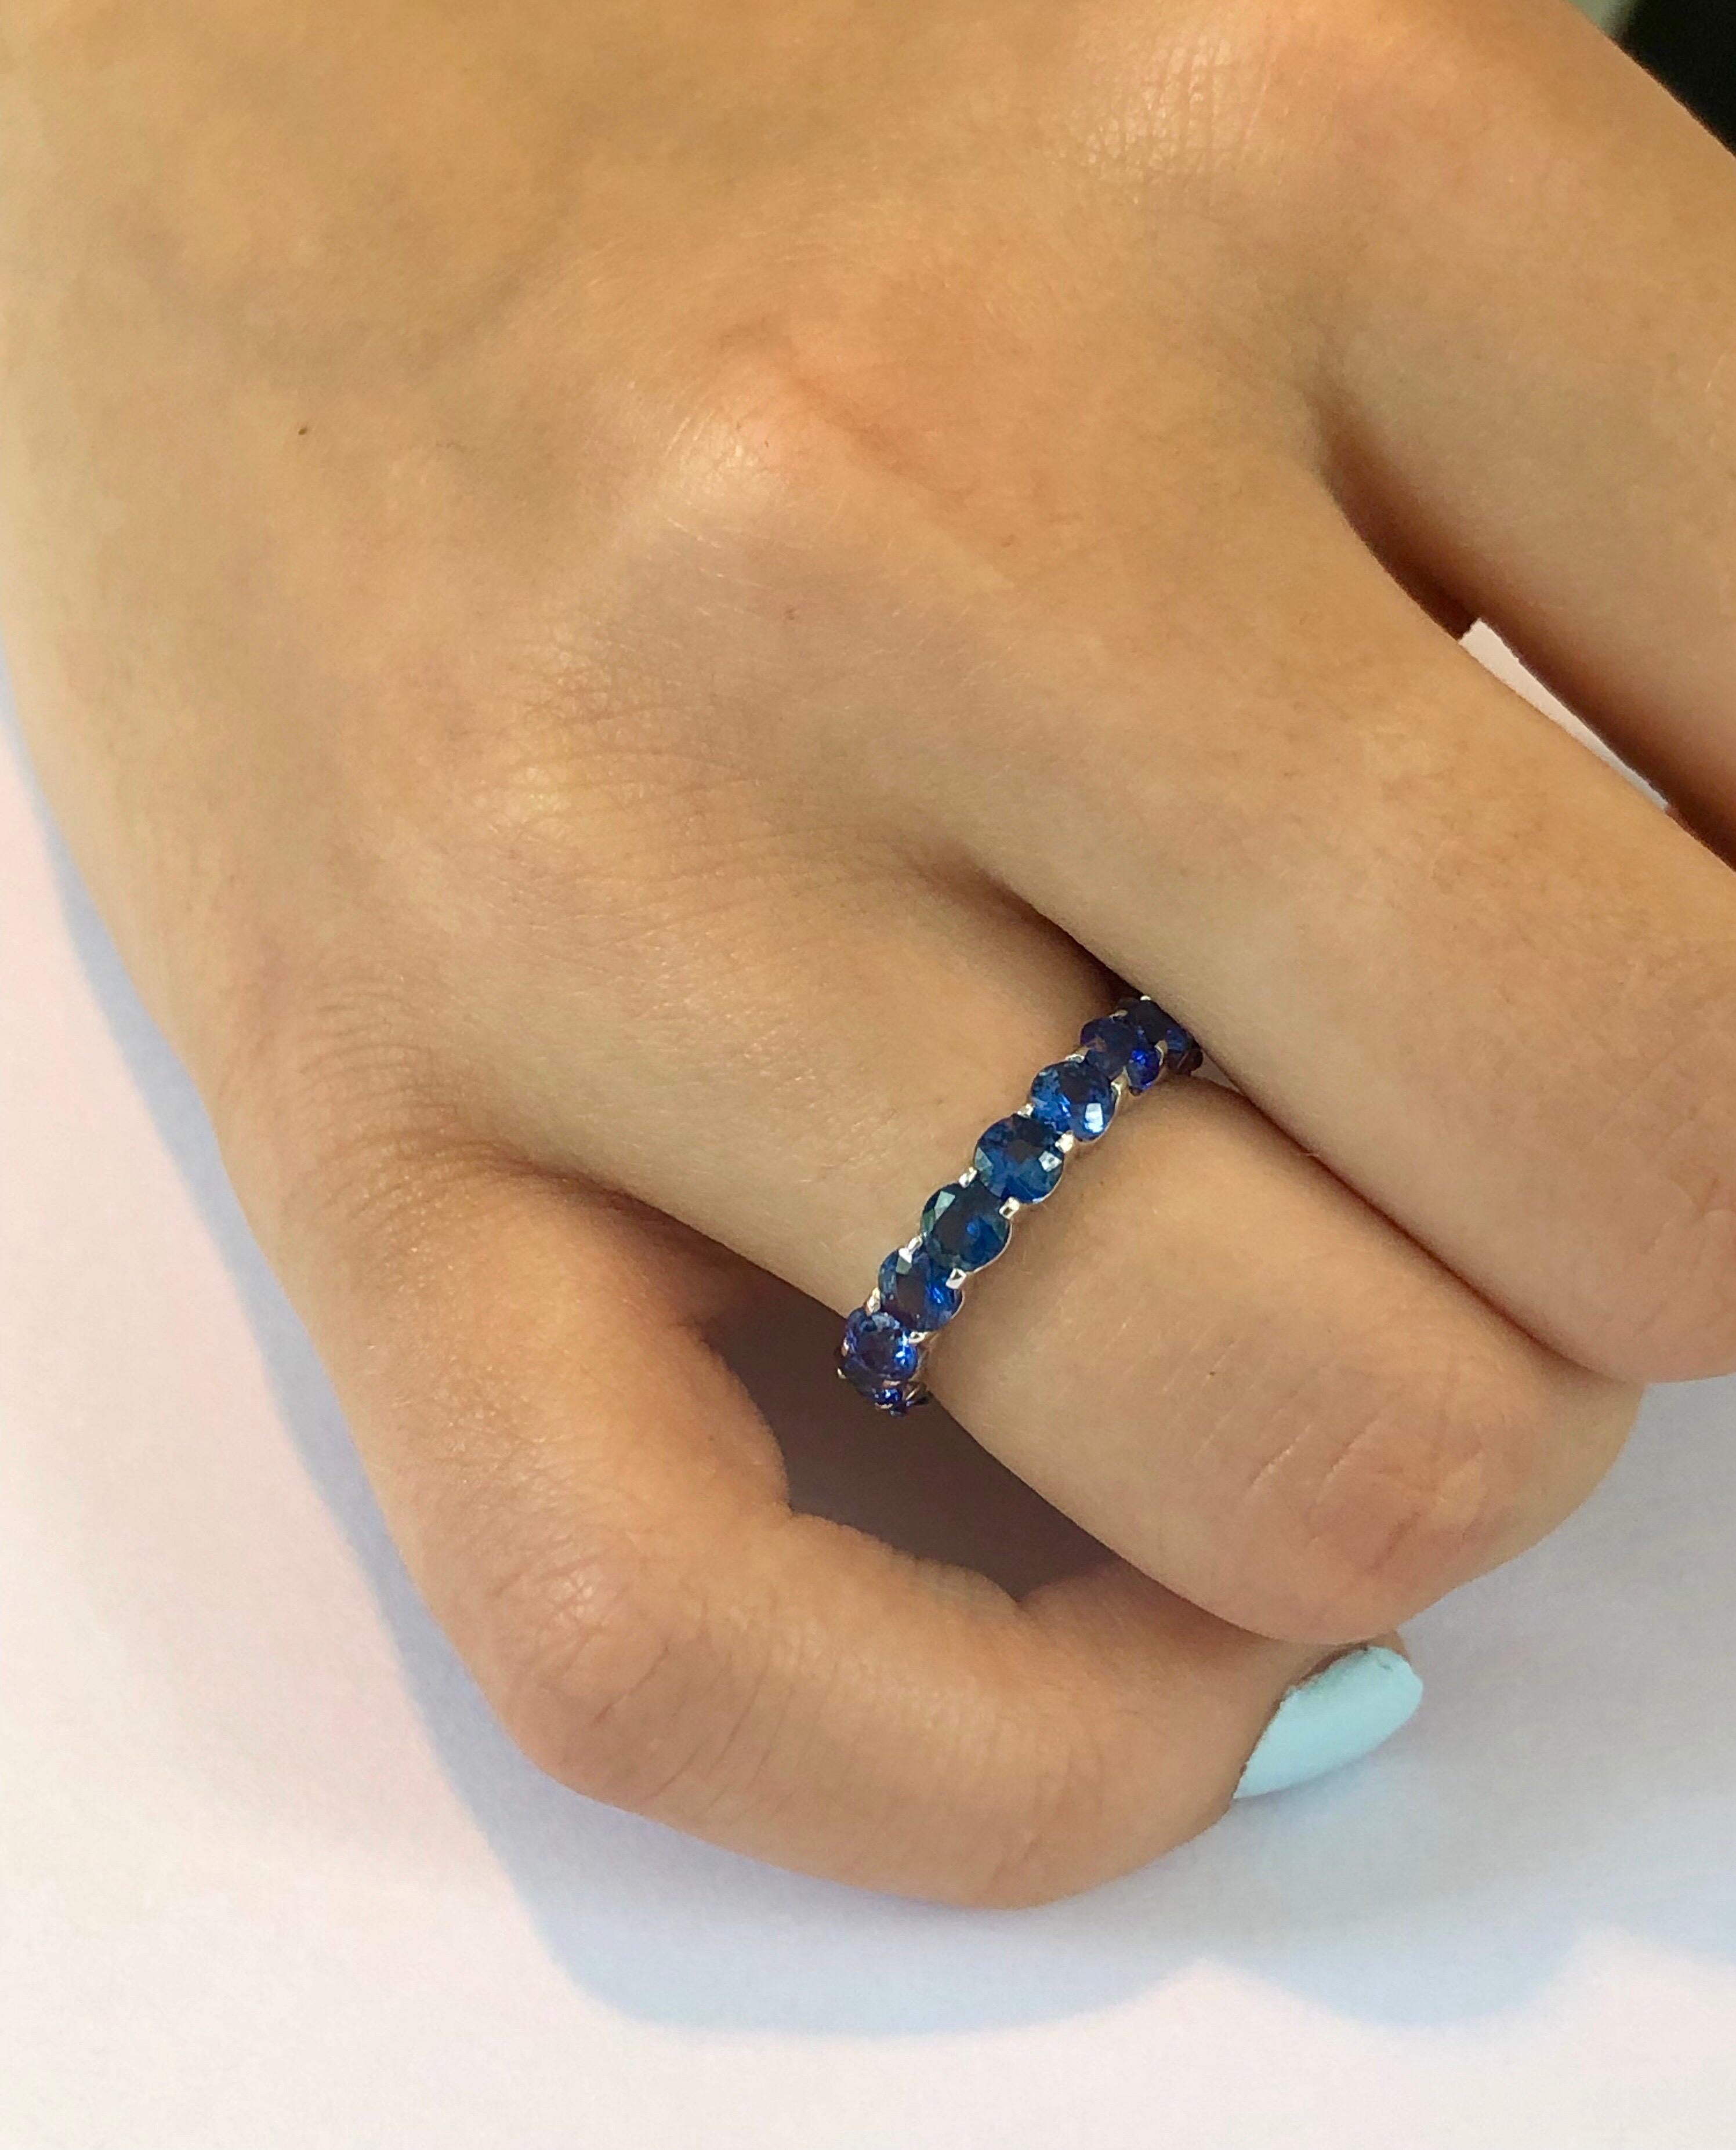 Platinum eternity ring with round cut sapphire prong-set. 
Sapphires weighing 4.50 carat 
Sapphire stone size 3.5 millimeter 
Ring size 6
New Ring
Handmade in USA
Our team of graduate gemologists carefully hand-select every diamond and gemstone
Our